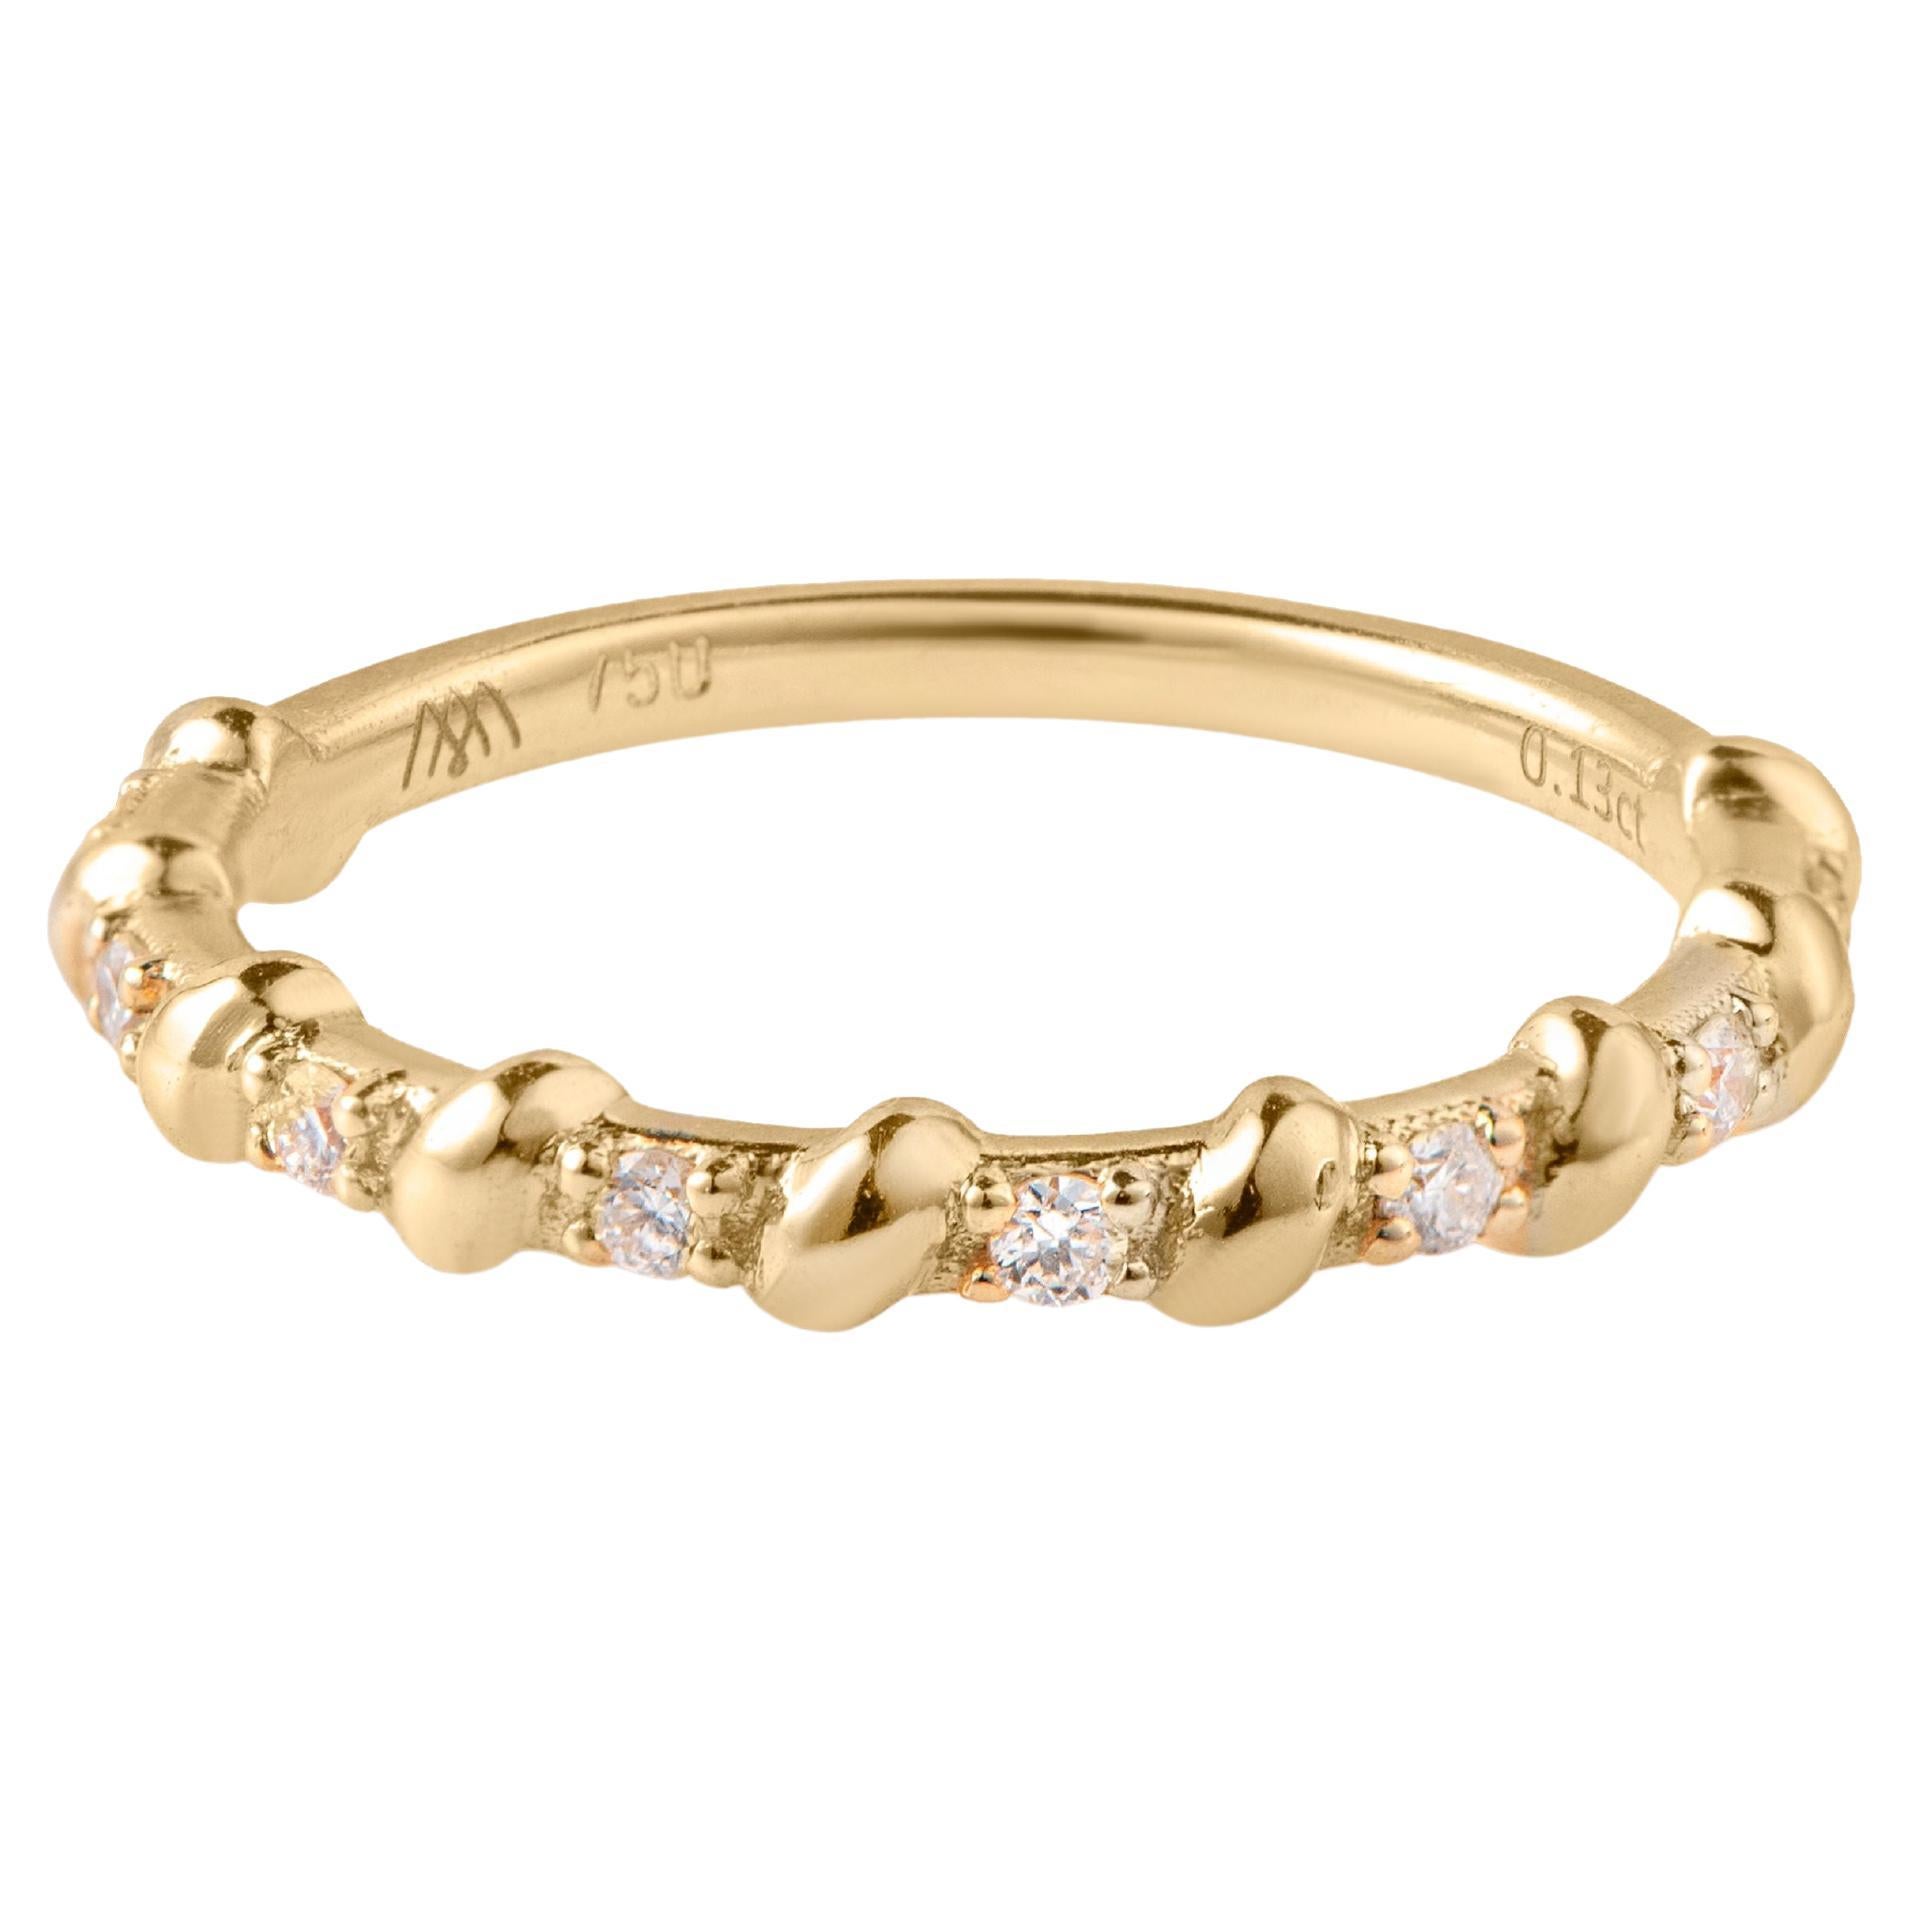 Diamond Ring with Rope Detail, 18K Gold, 0.13cts diamonds